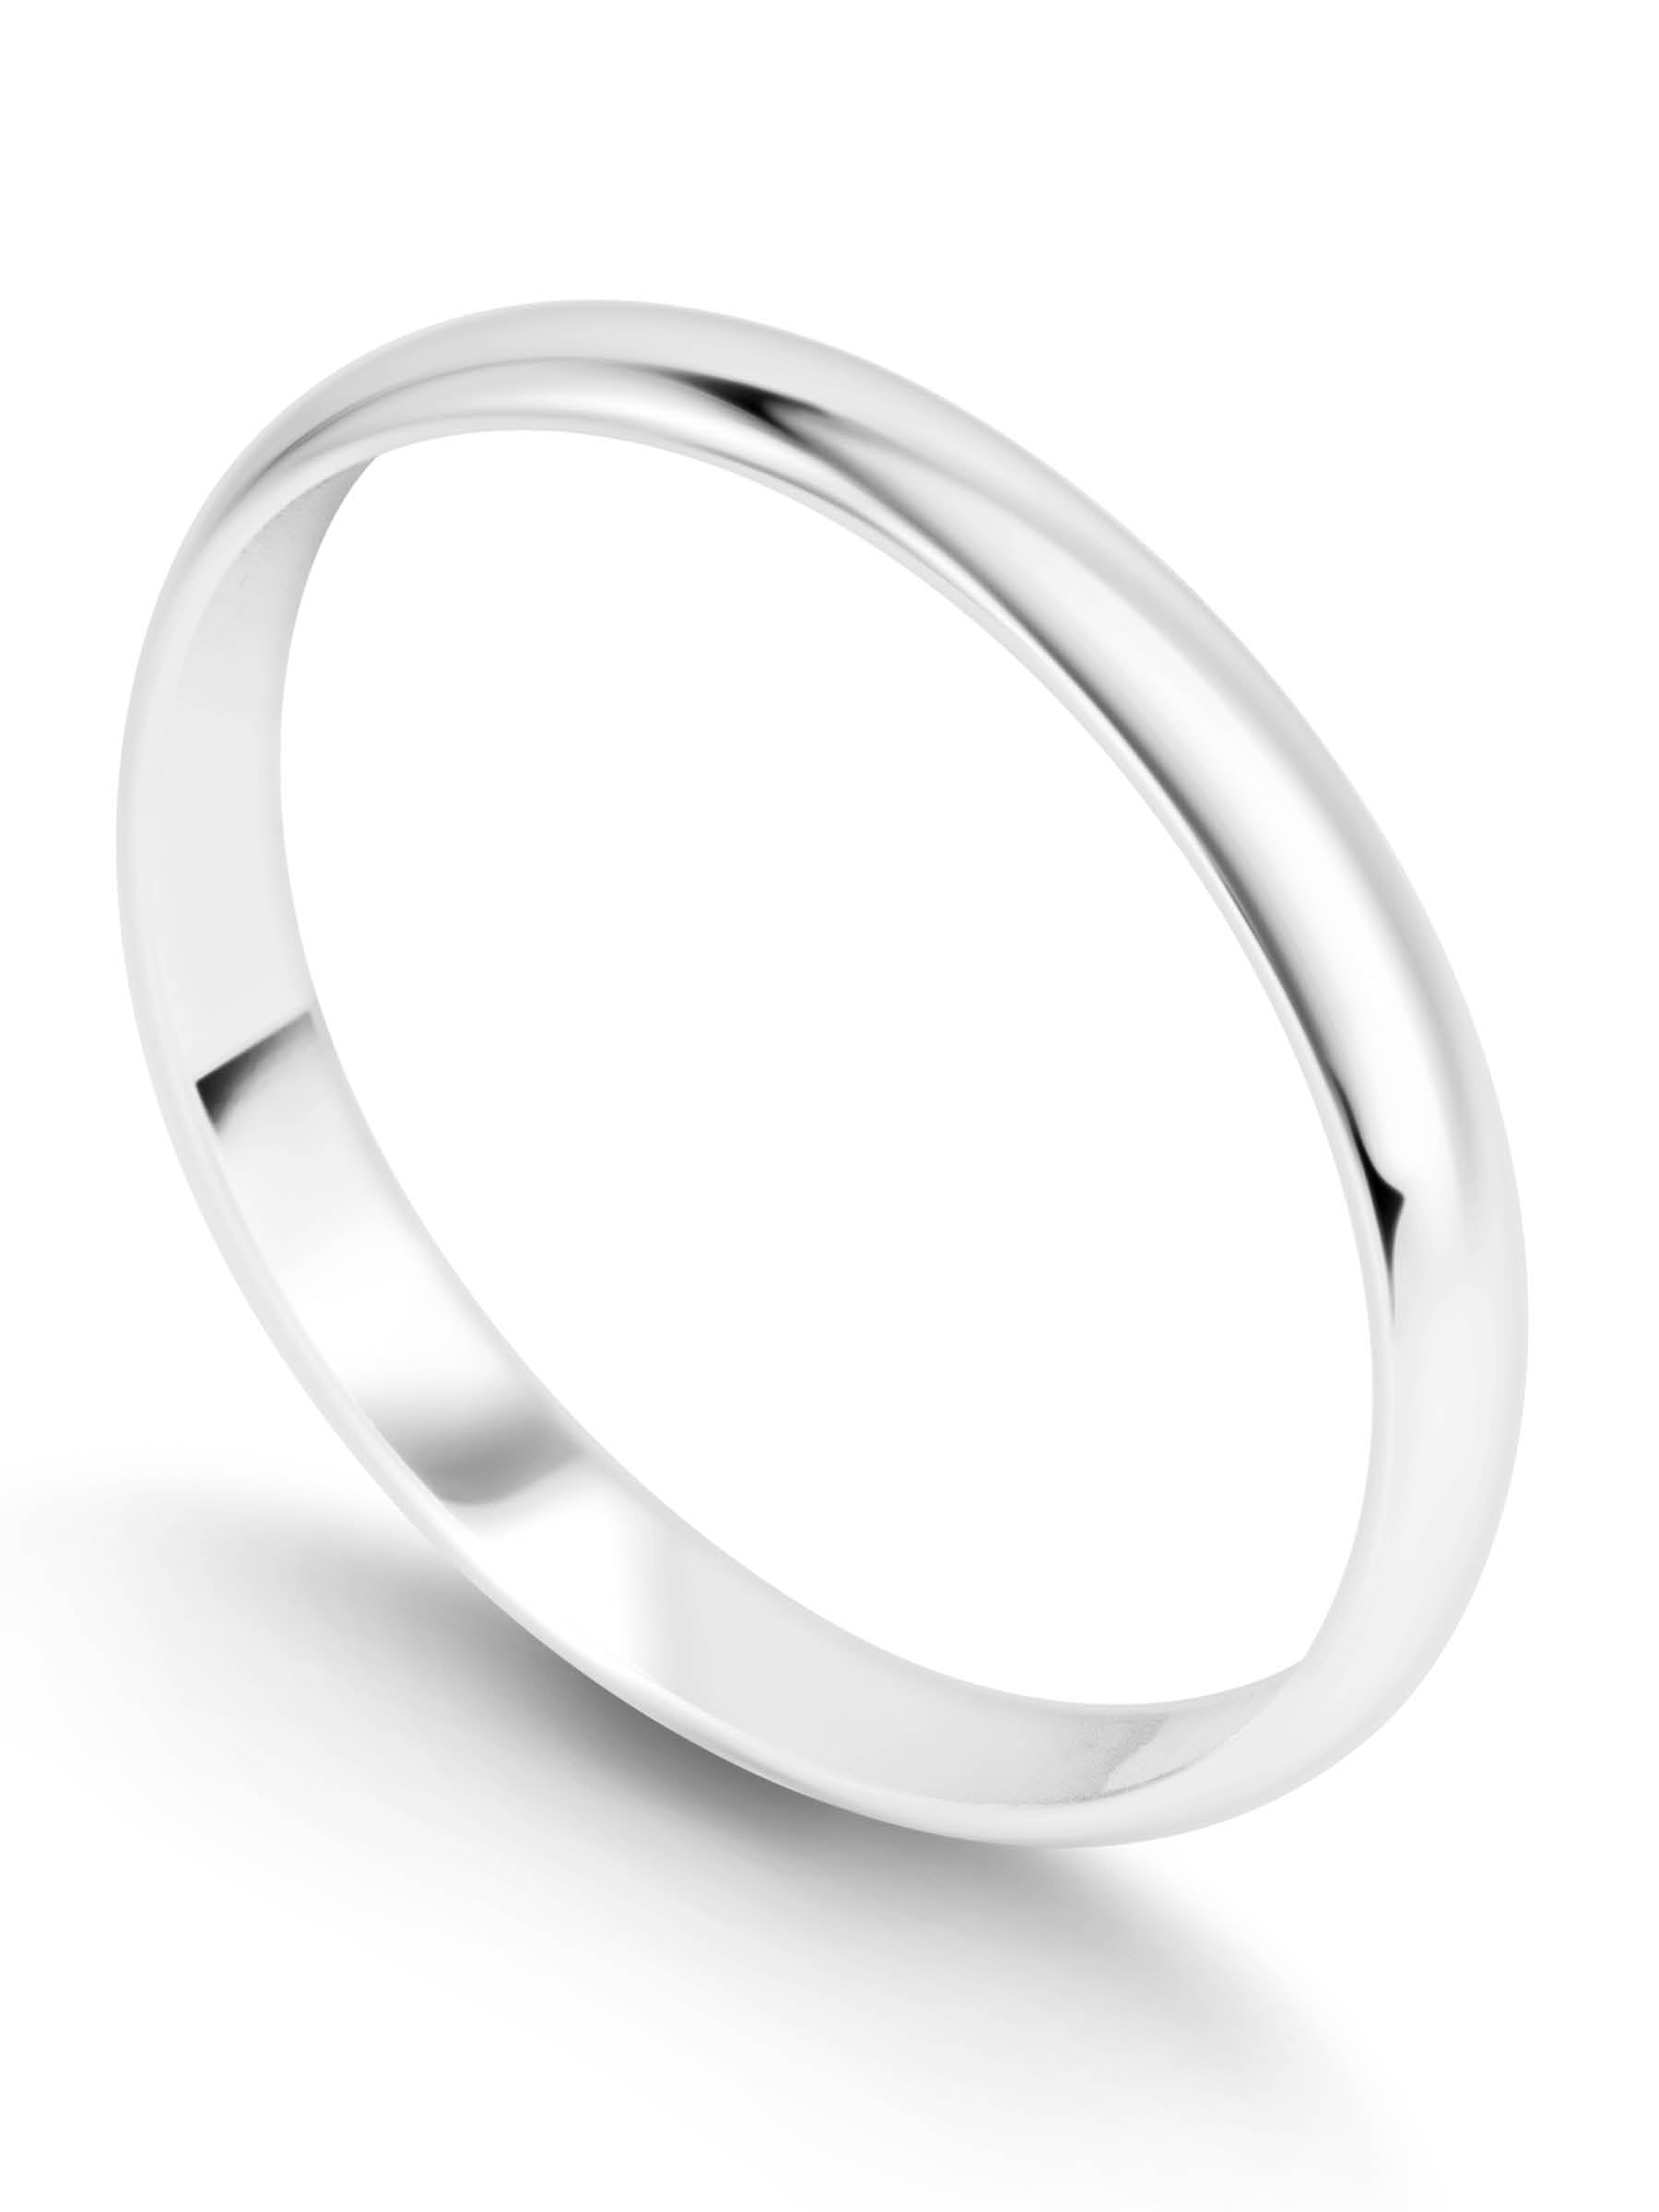 Unusual Sterling Silver Ring | LOVE2HAVE in the UK!